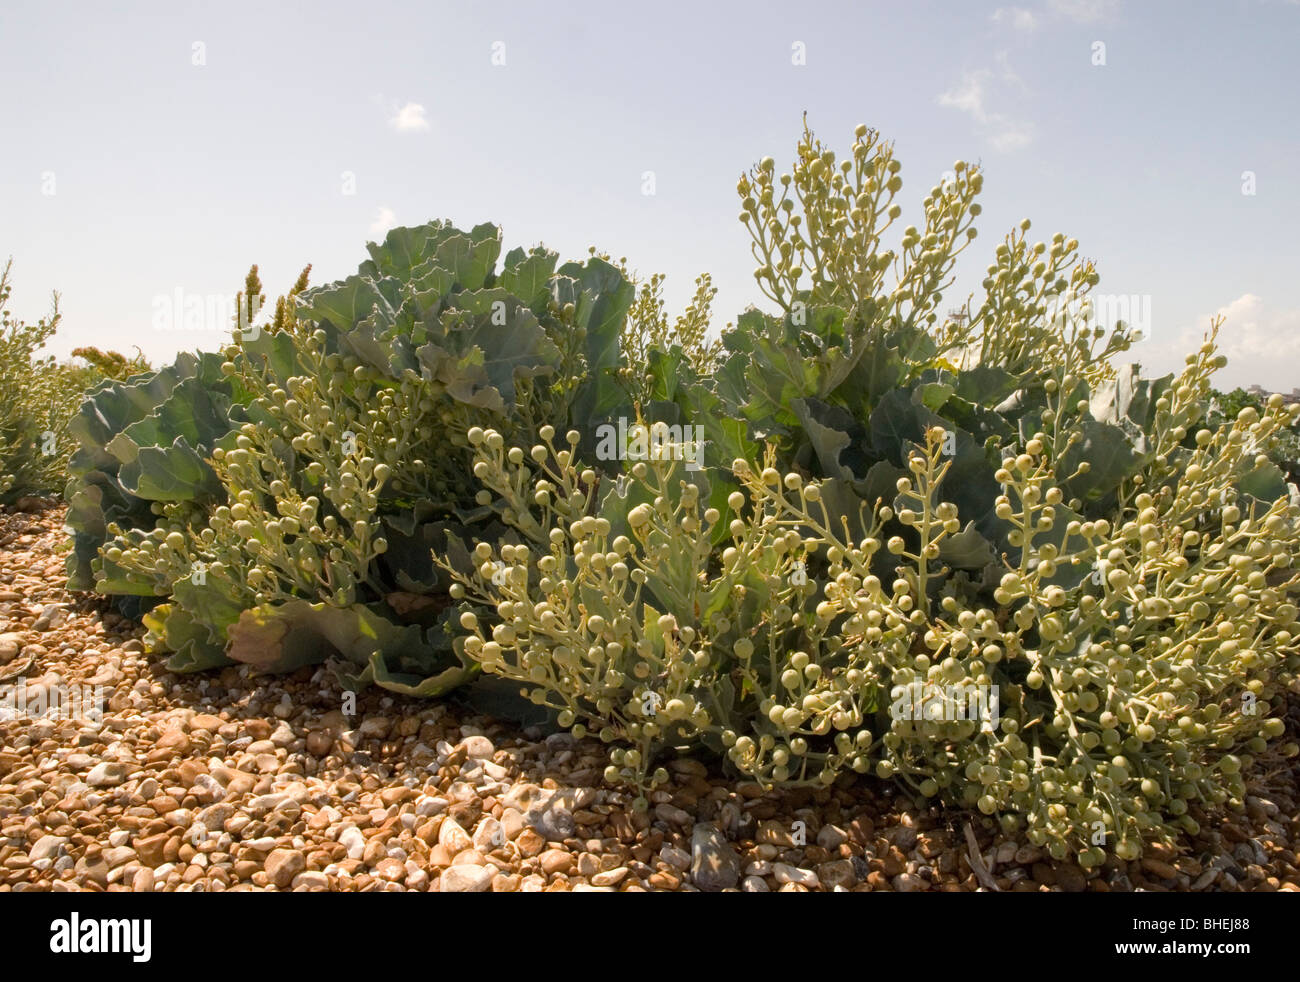 Landscape image of sea kale on a pebble beach at Dungeness, Kent, shot on a sunny day. Stock Photo